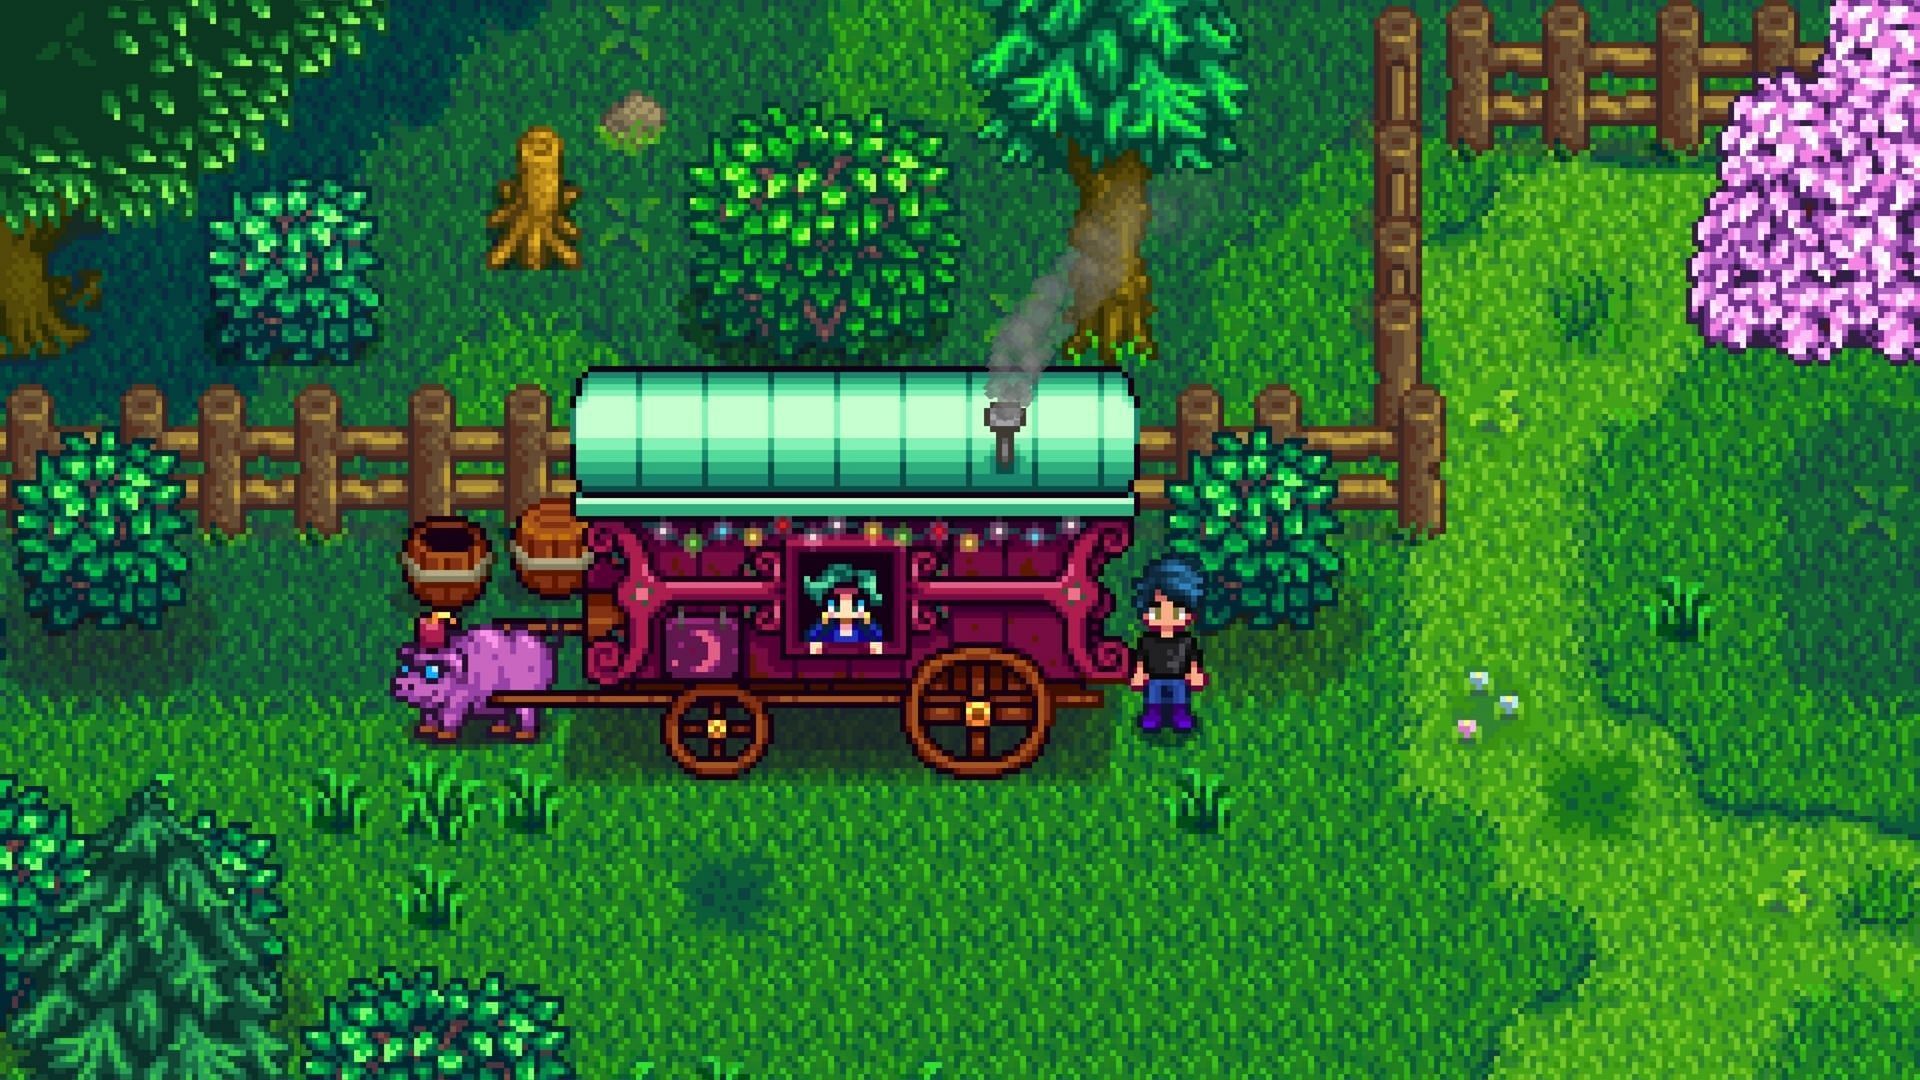 You can get Albacore from Krobus or the Traveling Cart (Image via ConcernedApe)